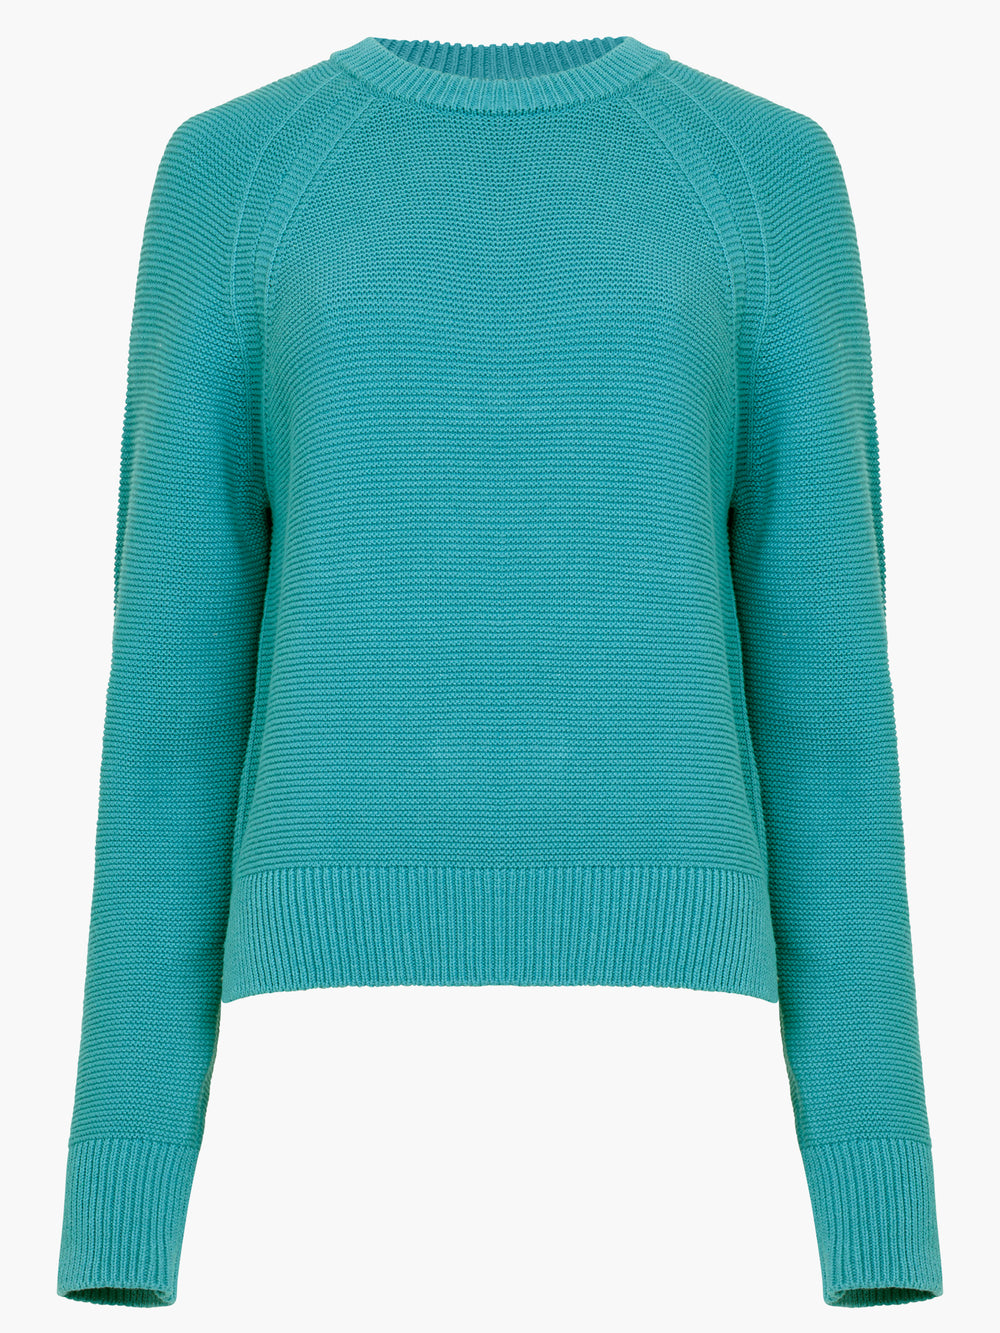 Lily Mozart Crew Neck Jumper Mosaic Blue | French Connection UK